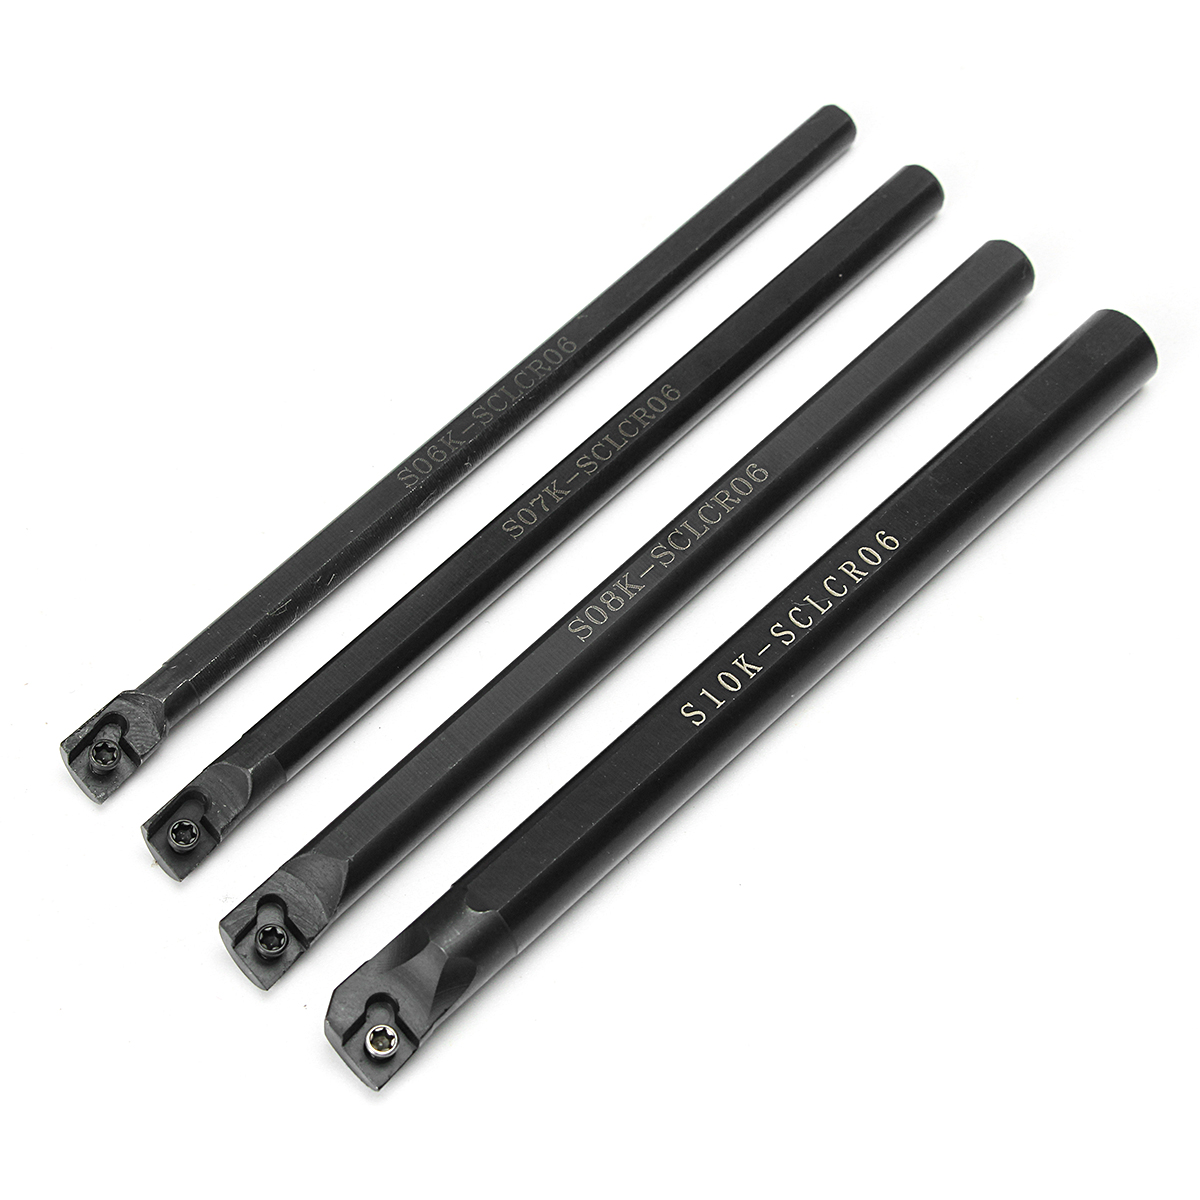 4pcs-67810mm-SCLCR06-Turning-Tool-Holder-Lathe-Boring-Bar-With-10pcs-CCMT060204-Inserts-1111391-5